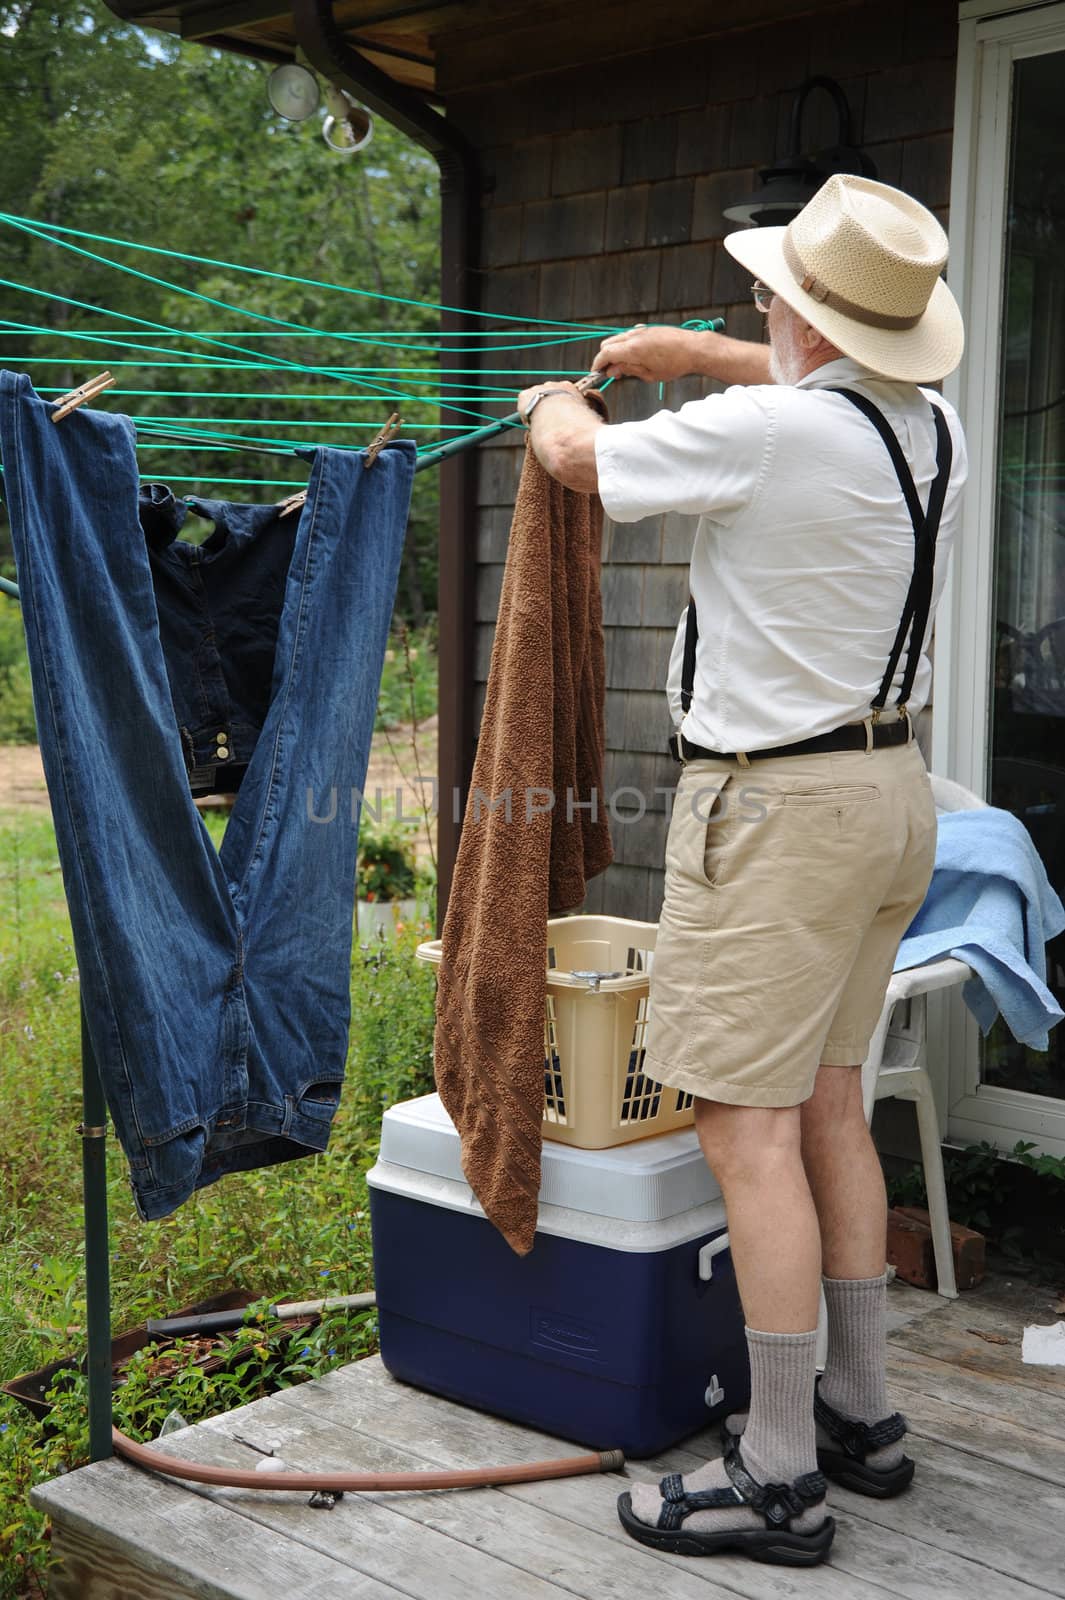 Country gentleman washing his clothes on wash day.